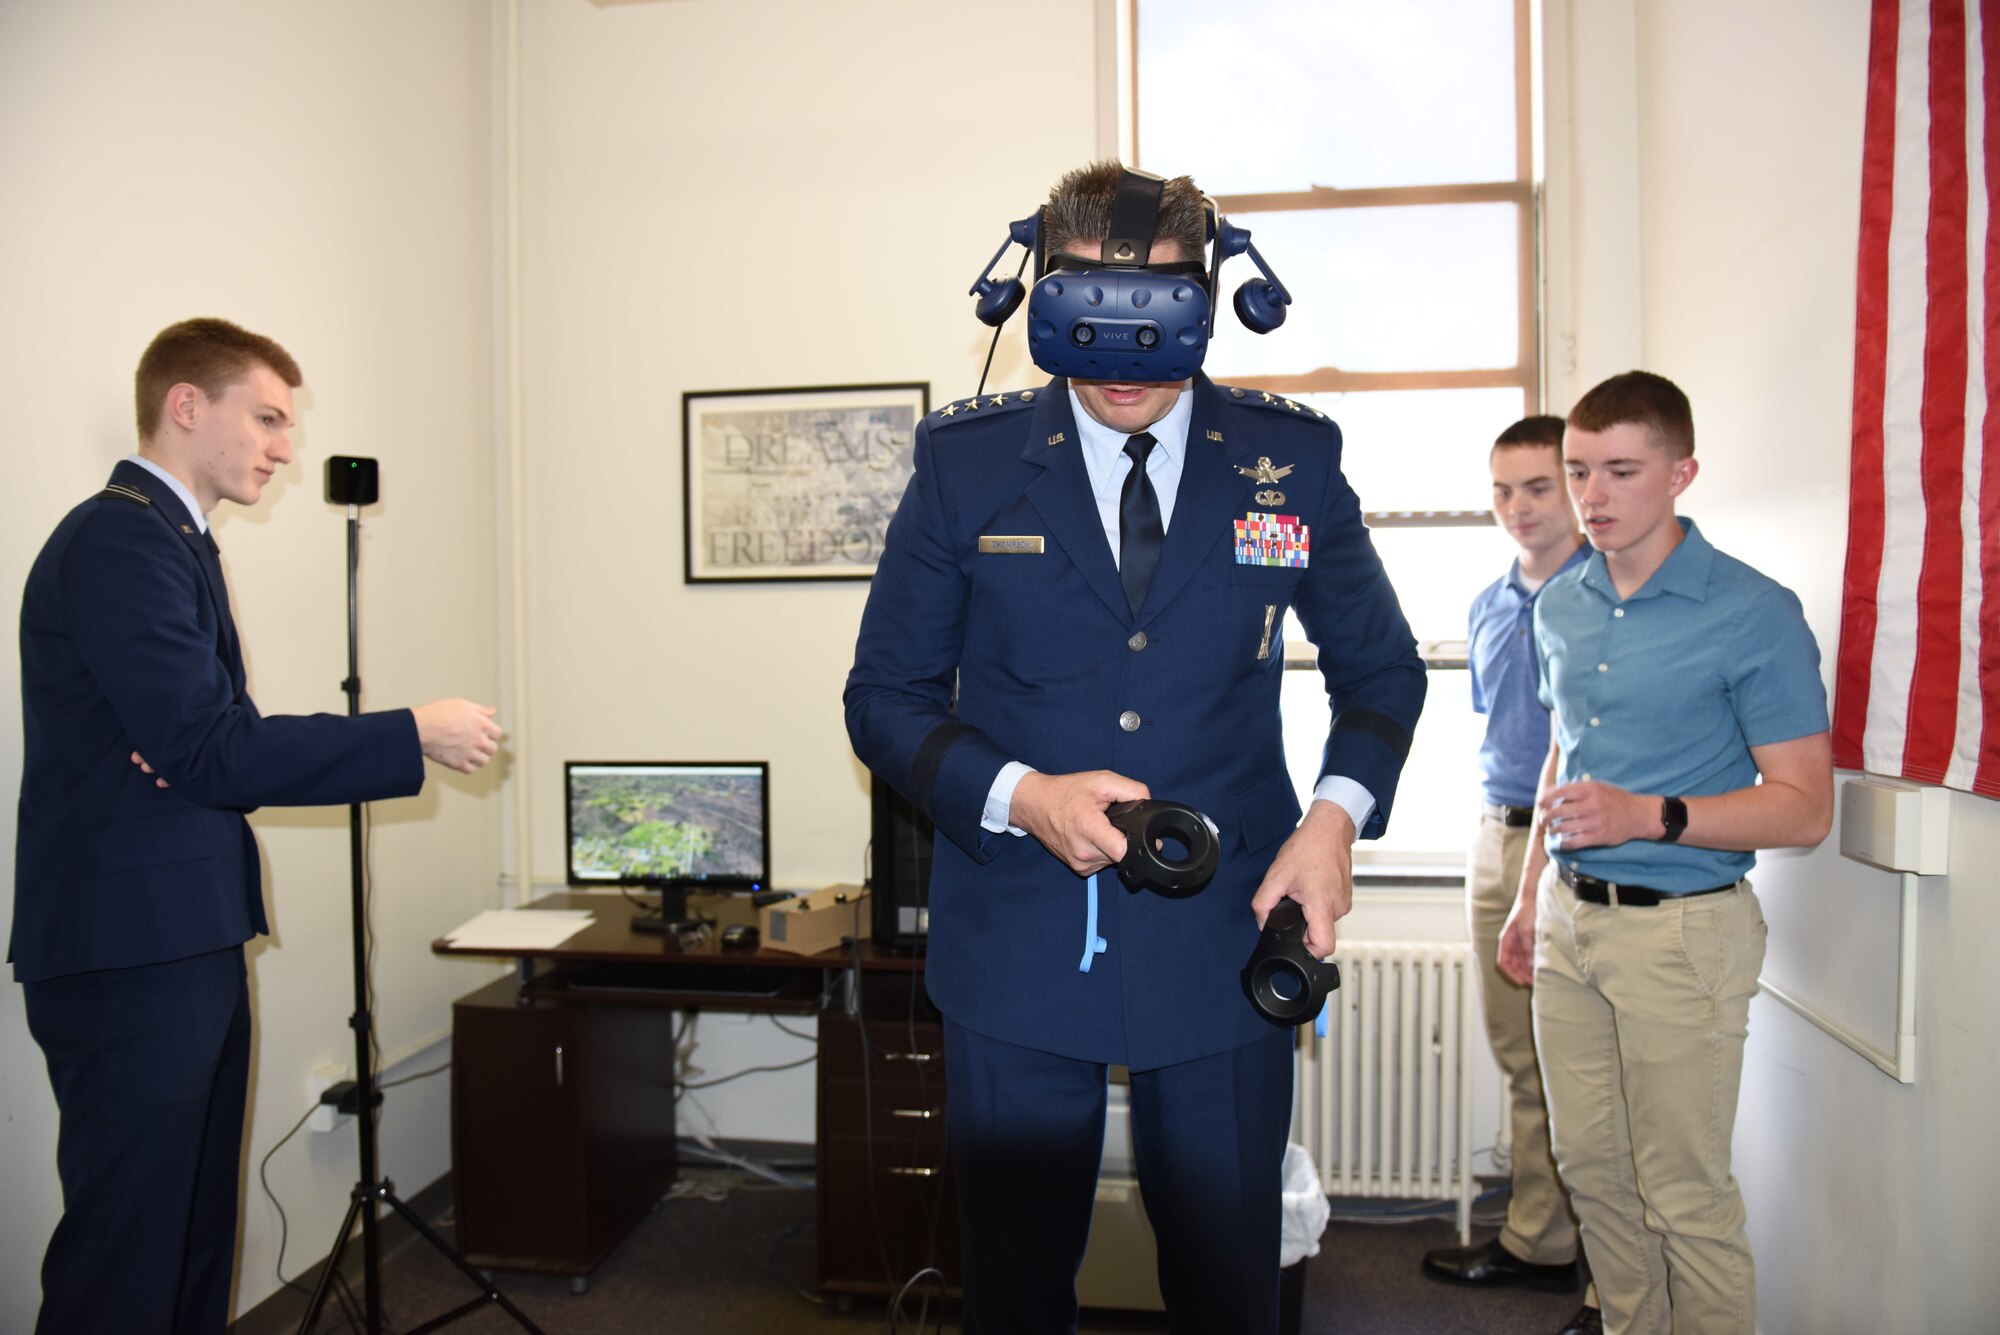 Lt. Gen. David Thompson, Air Force Space Command vice commander, uses virtual reality goggles with the assistance of cadets from Air Force ROTC Detachment 730 in Pittsburgh, Pennsylvania June 14, 2019.